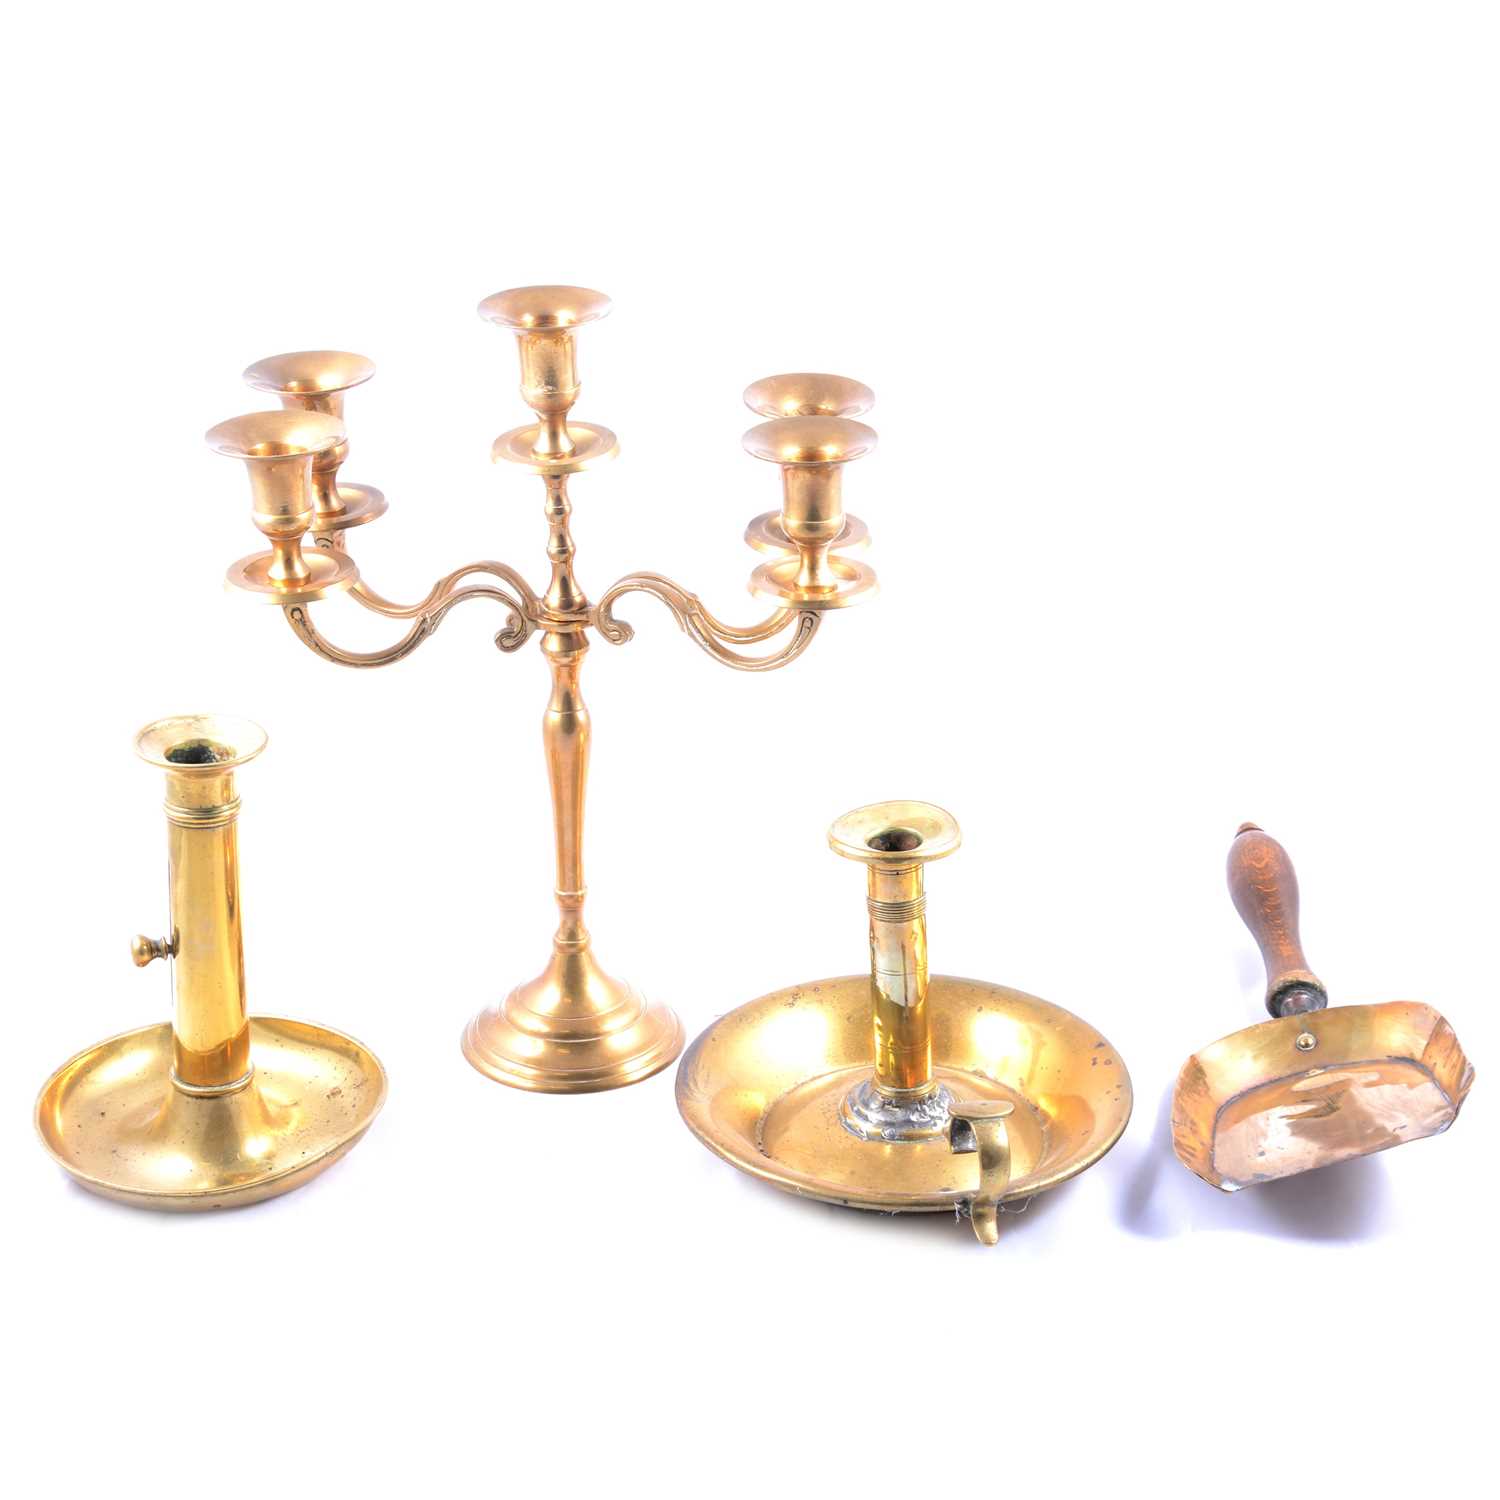 Collection of brass and copperware